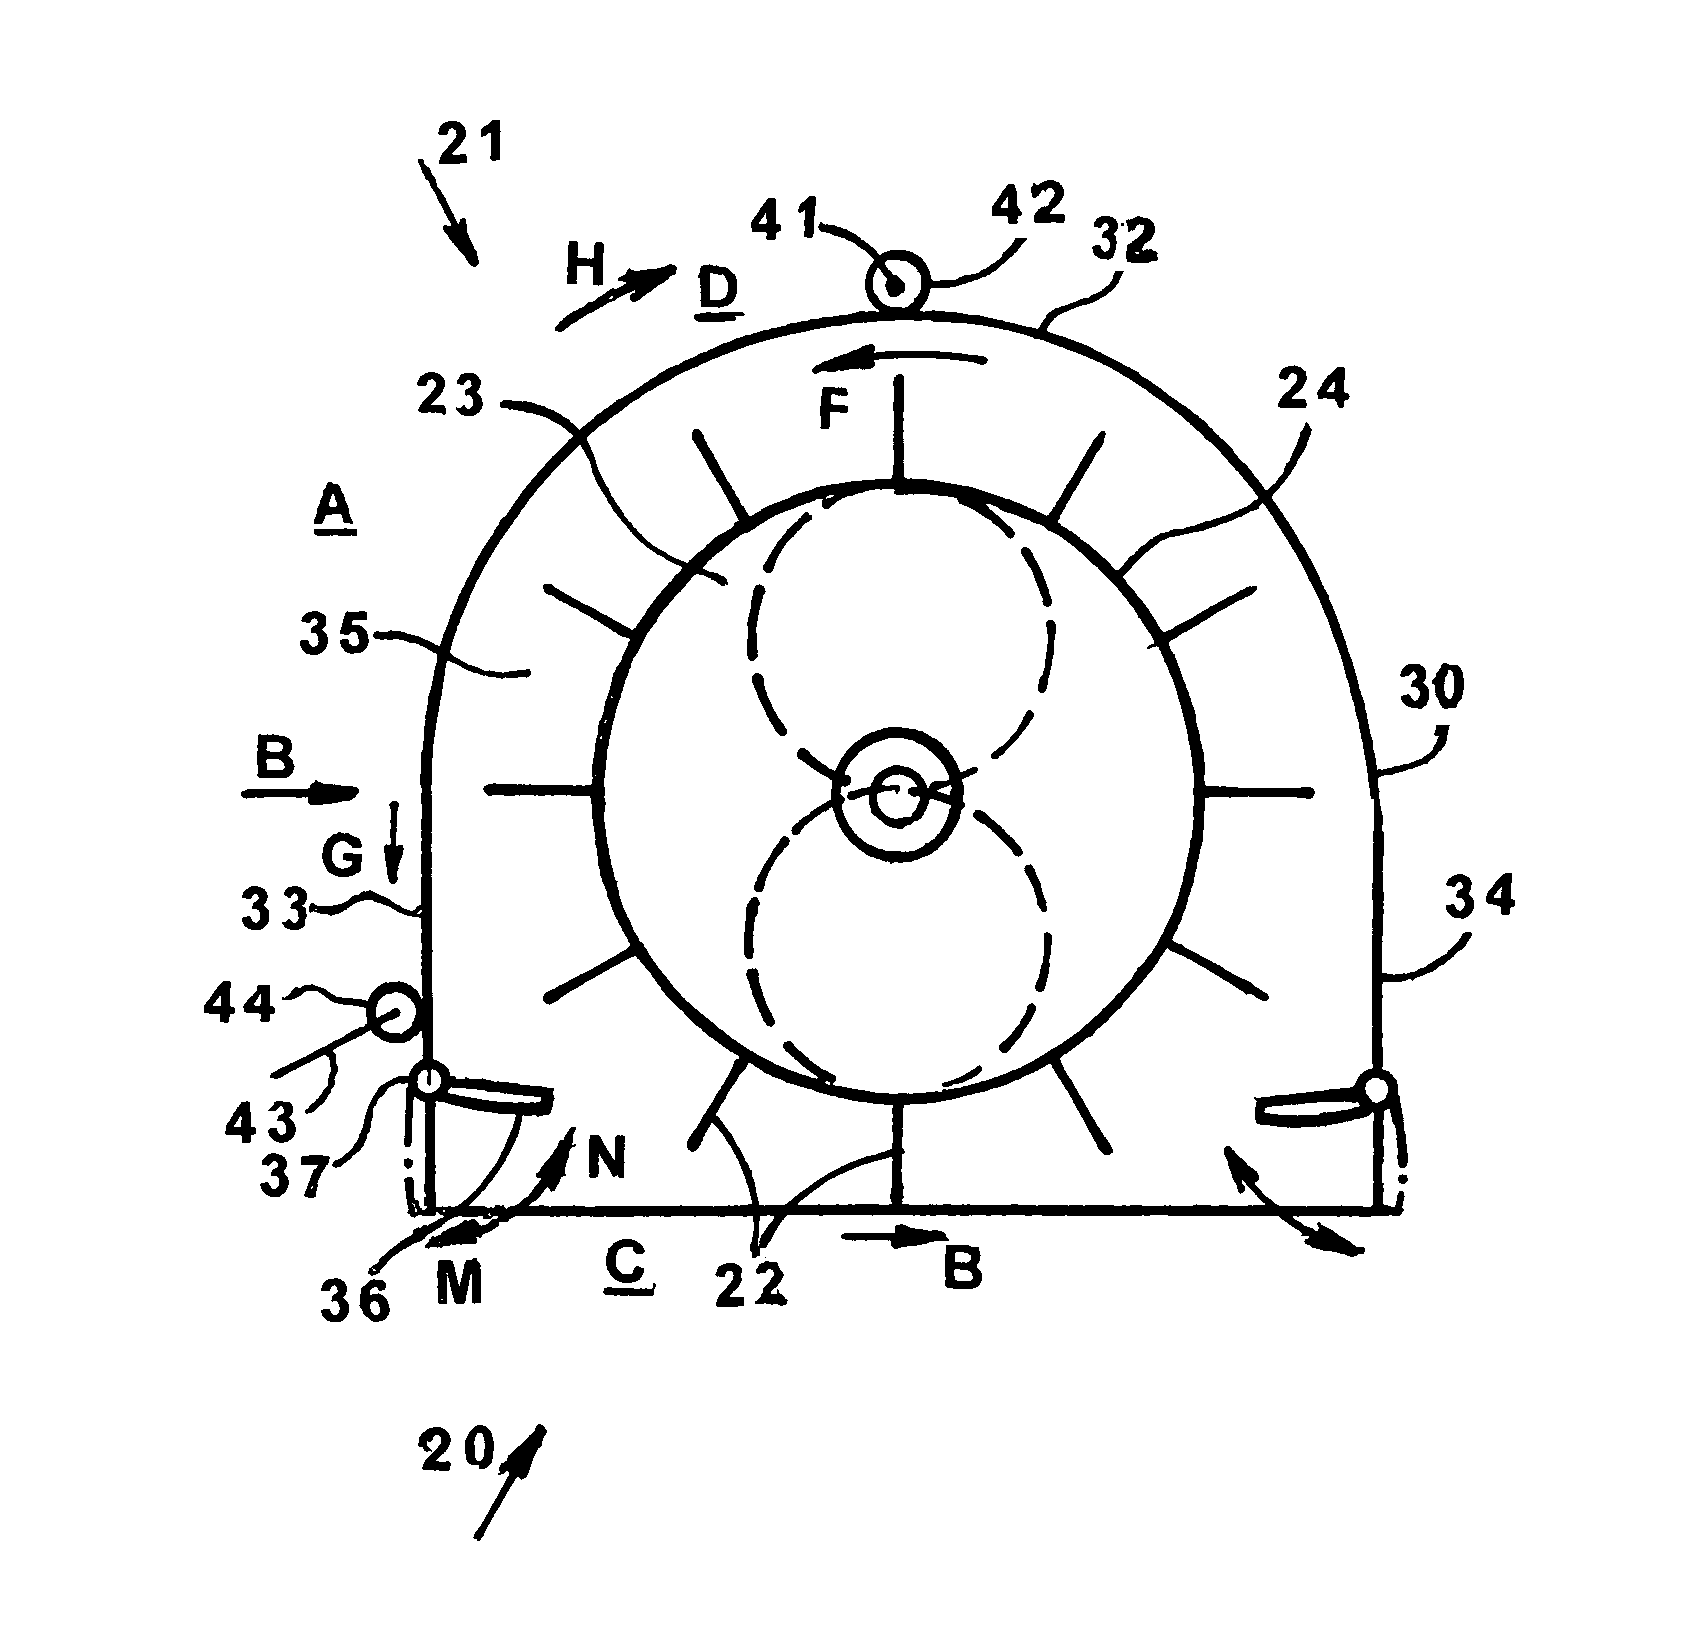 Apparatus for receiving and transferring kinetic energy from water flow